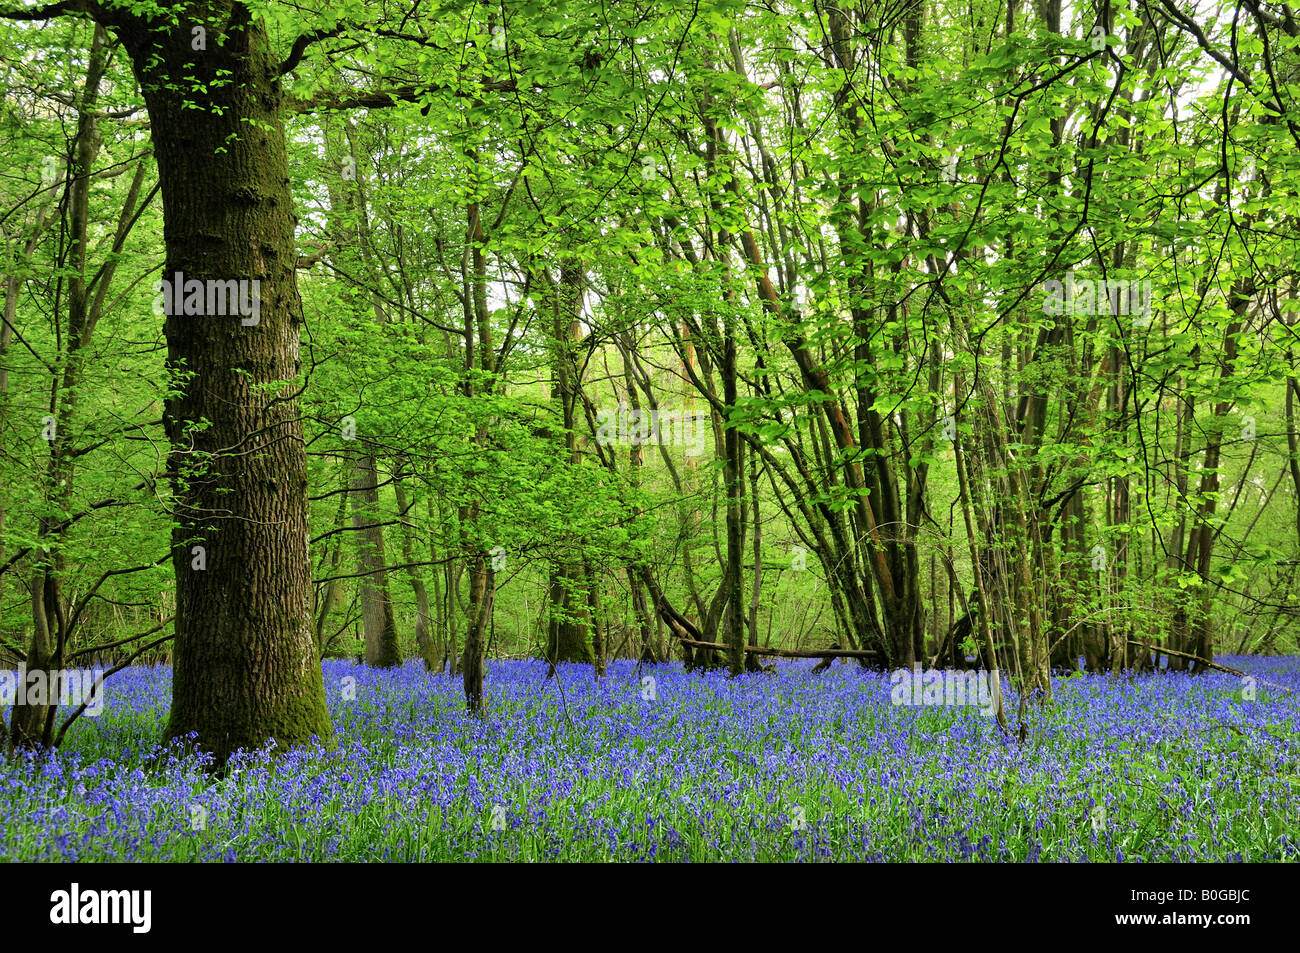 Bluebell wood, East Sussex, Regno Unito Foto Stock